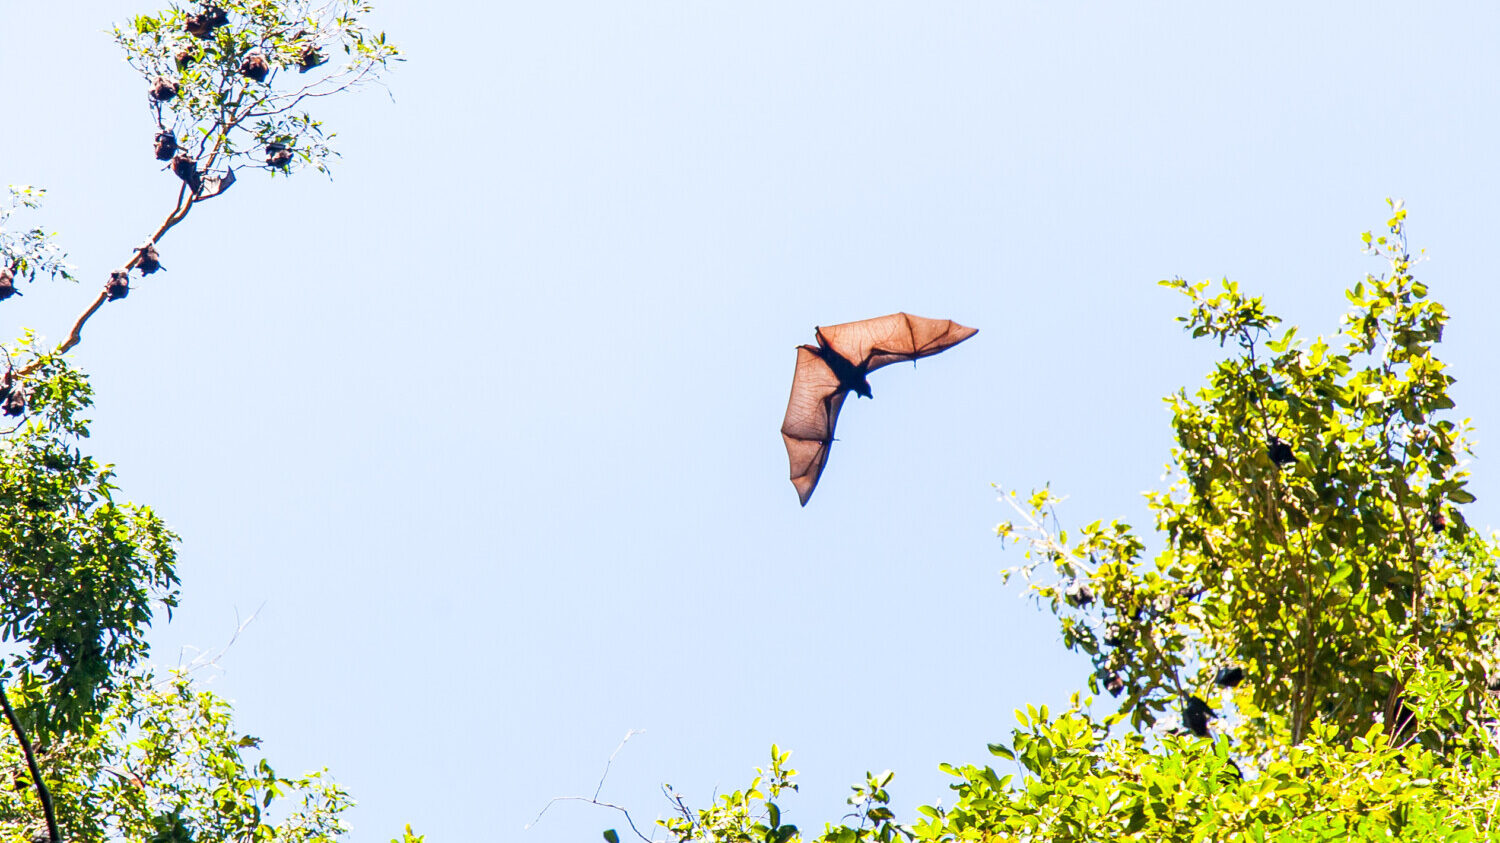 How to attract bats to your backyard